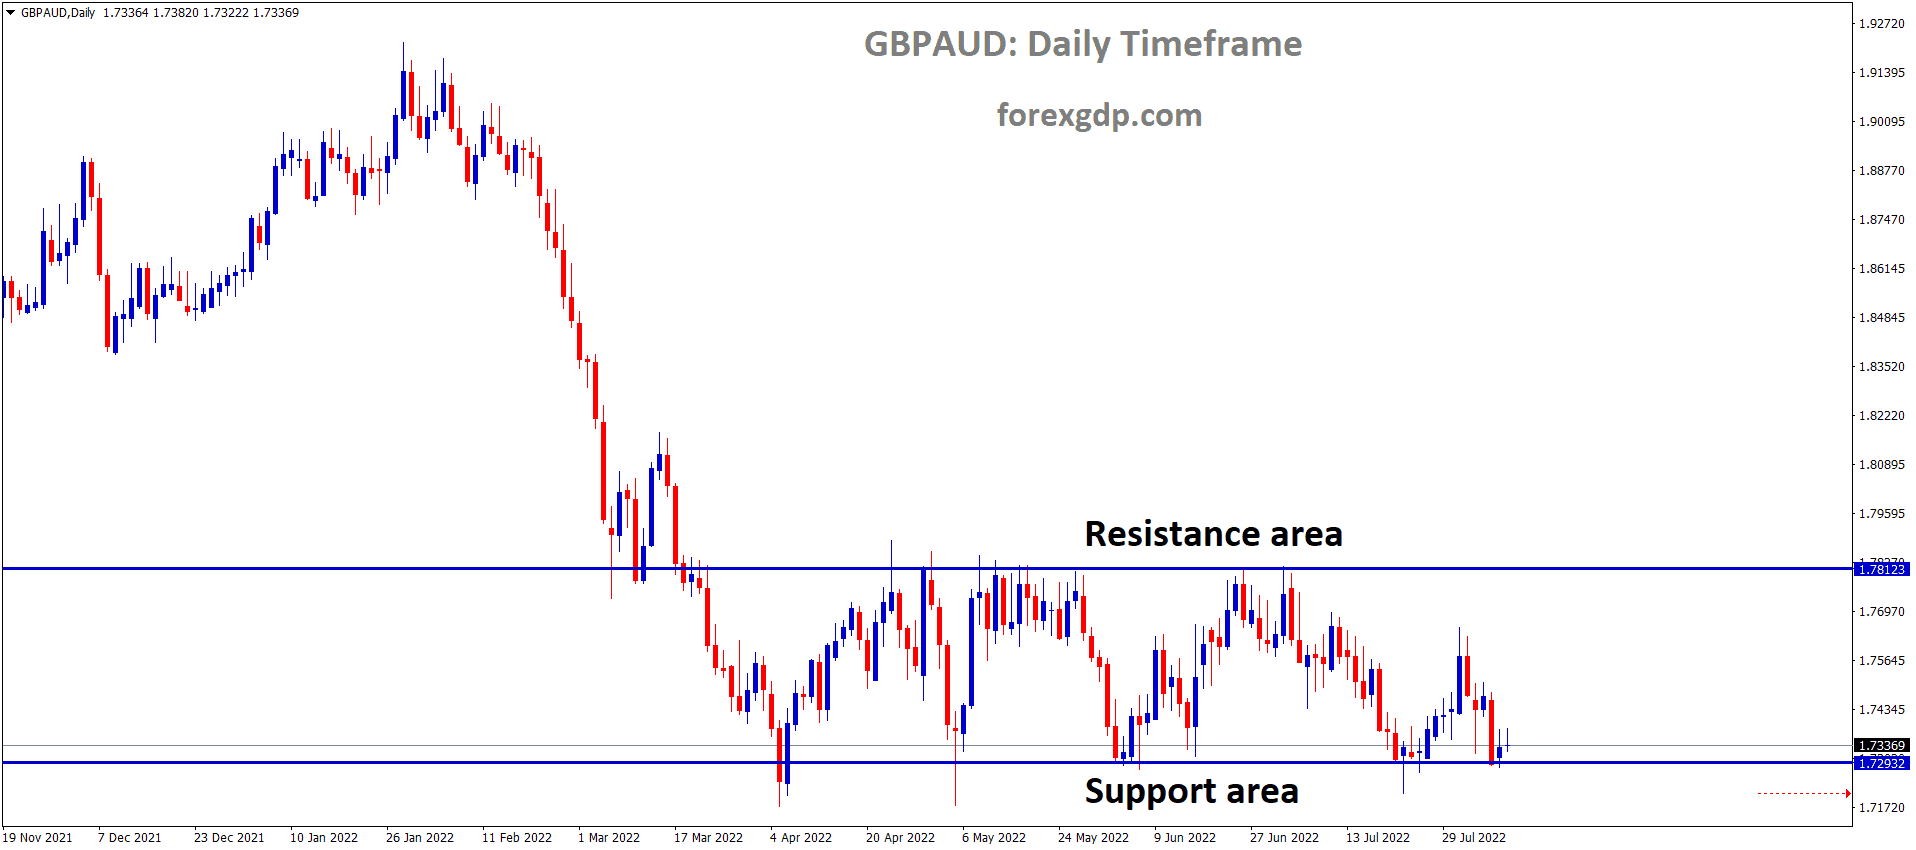 GBPAUD is moving in the Box Pattern and the Market has rebounded from the horizontal support area of the pattern